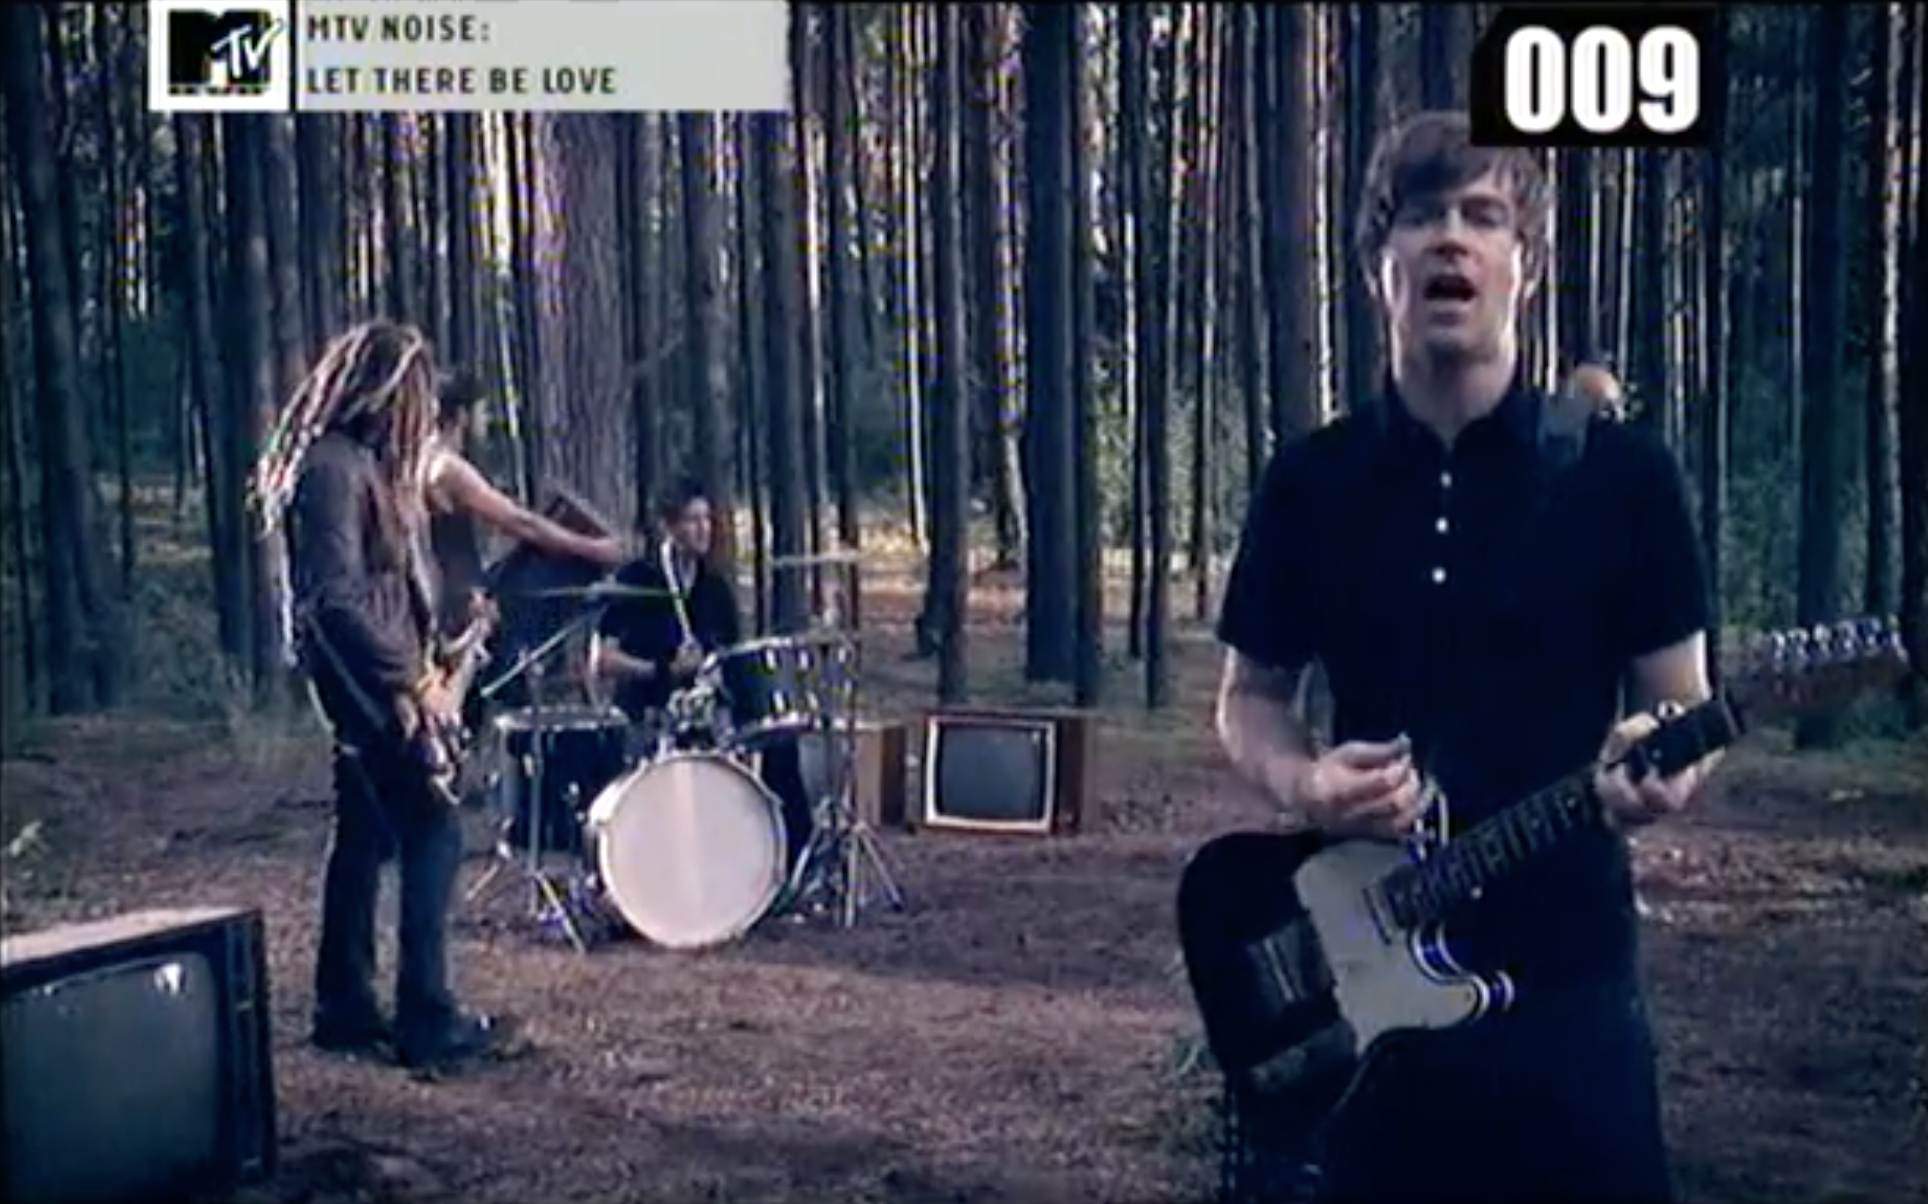 Music video of Nada Surf playing standing in a forrest